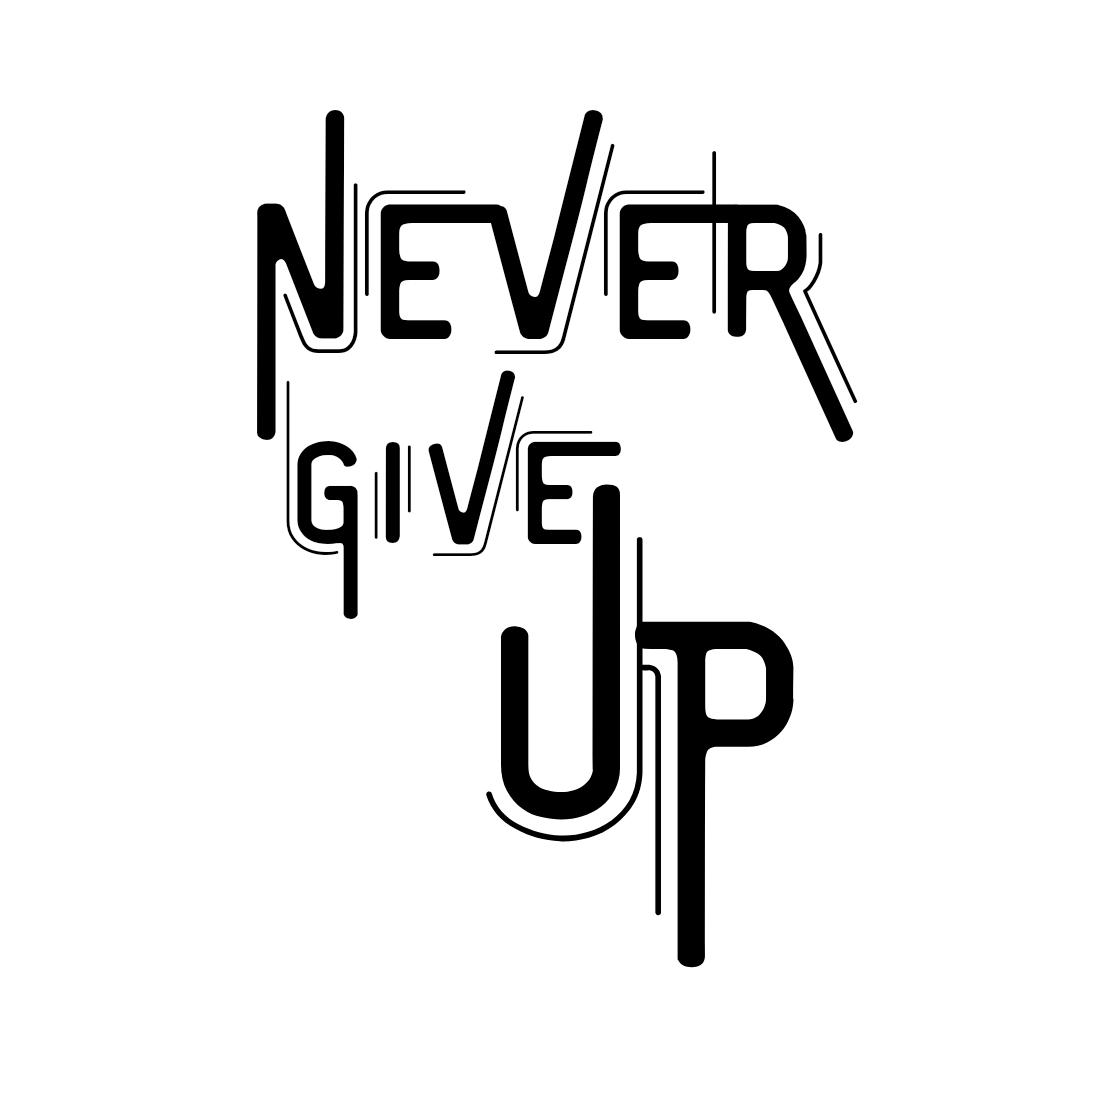 never give up1 37